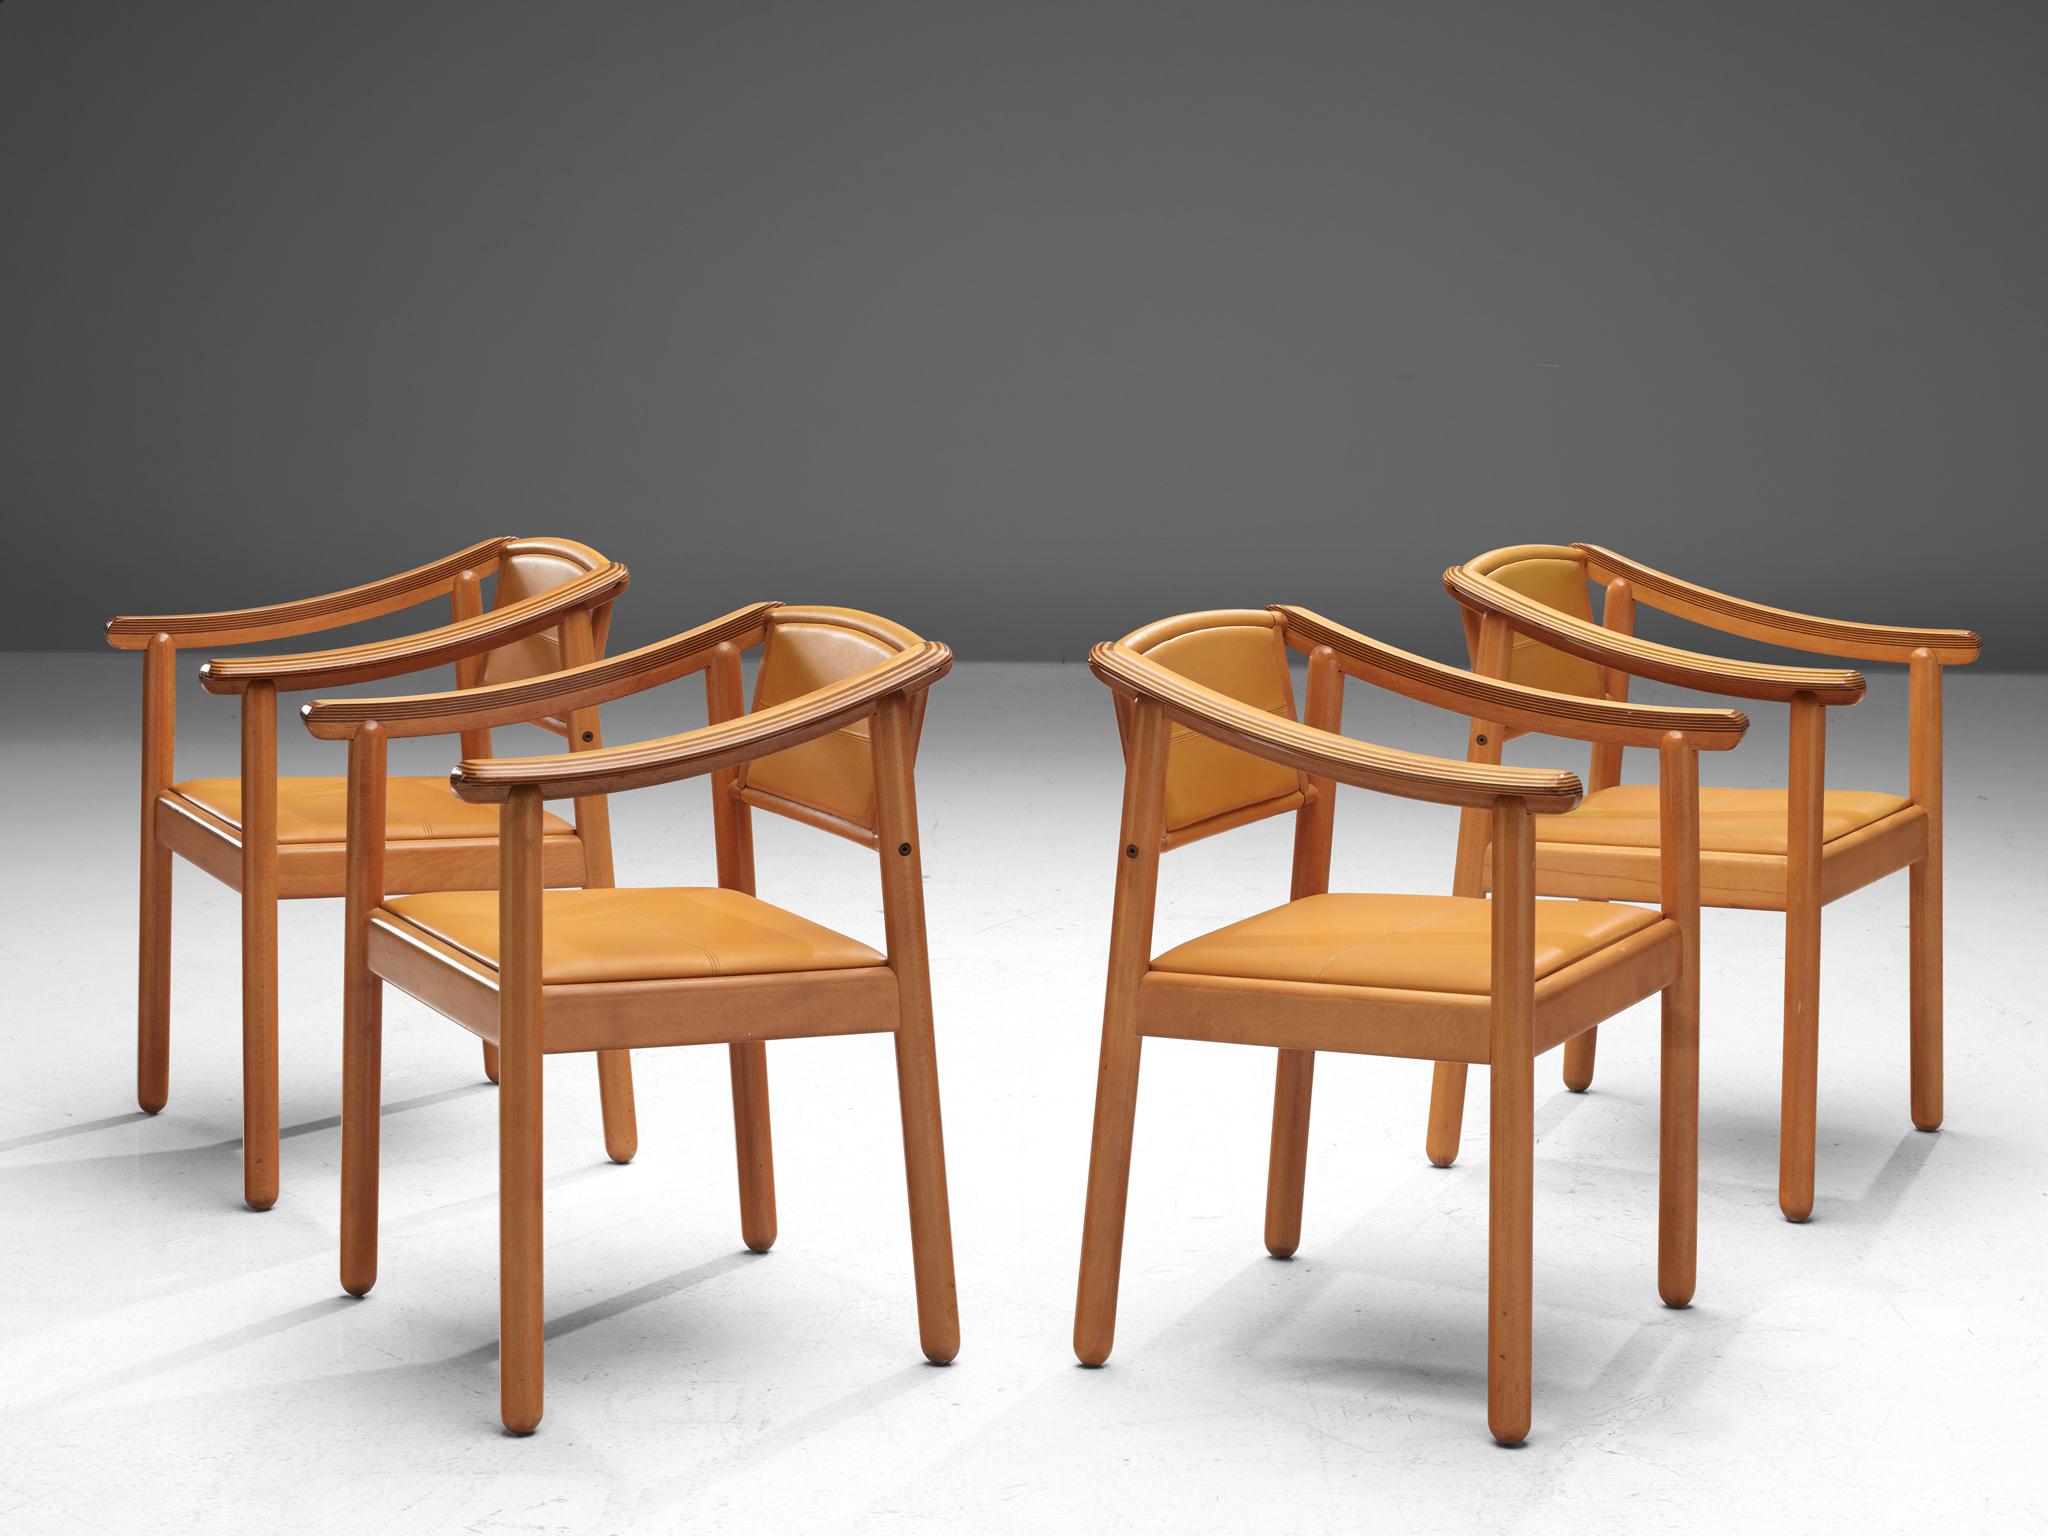 Afra & Tobia Scarpa for Maxalto, set of four dining chairs 'Artona', leather and wood, Italy, 1970s

Set of four Artona armchairs by the Italian designer couple Afra and Tobia Scarpa. The Artona line by the Scarpa duo was in fact the first line